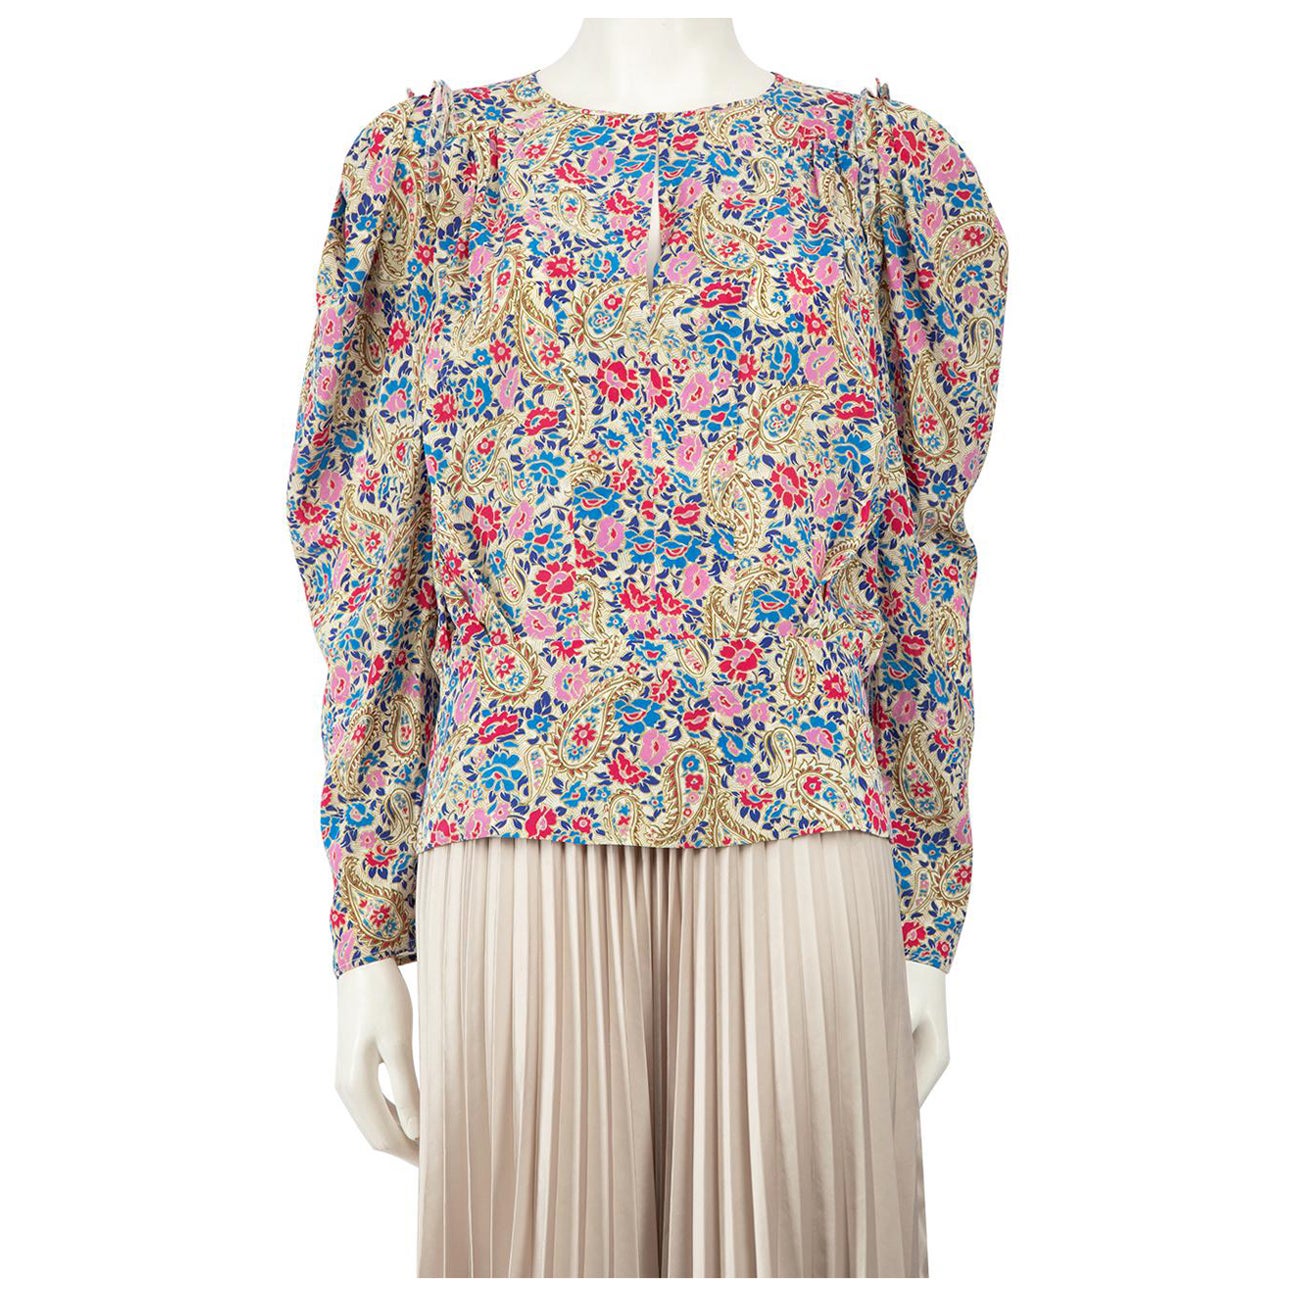 Isabel Marant Floral Paisley Print Top Size XL For Sale